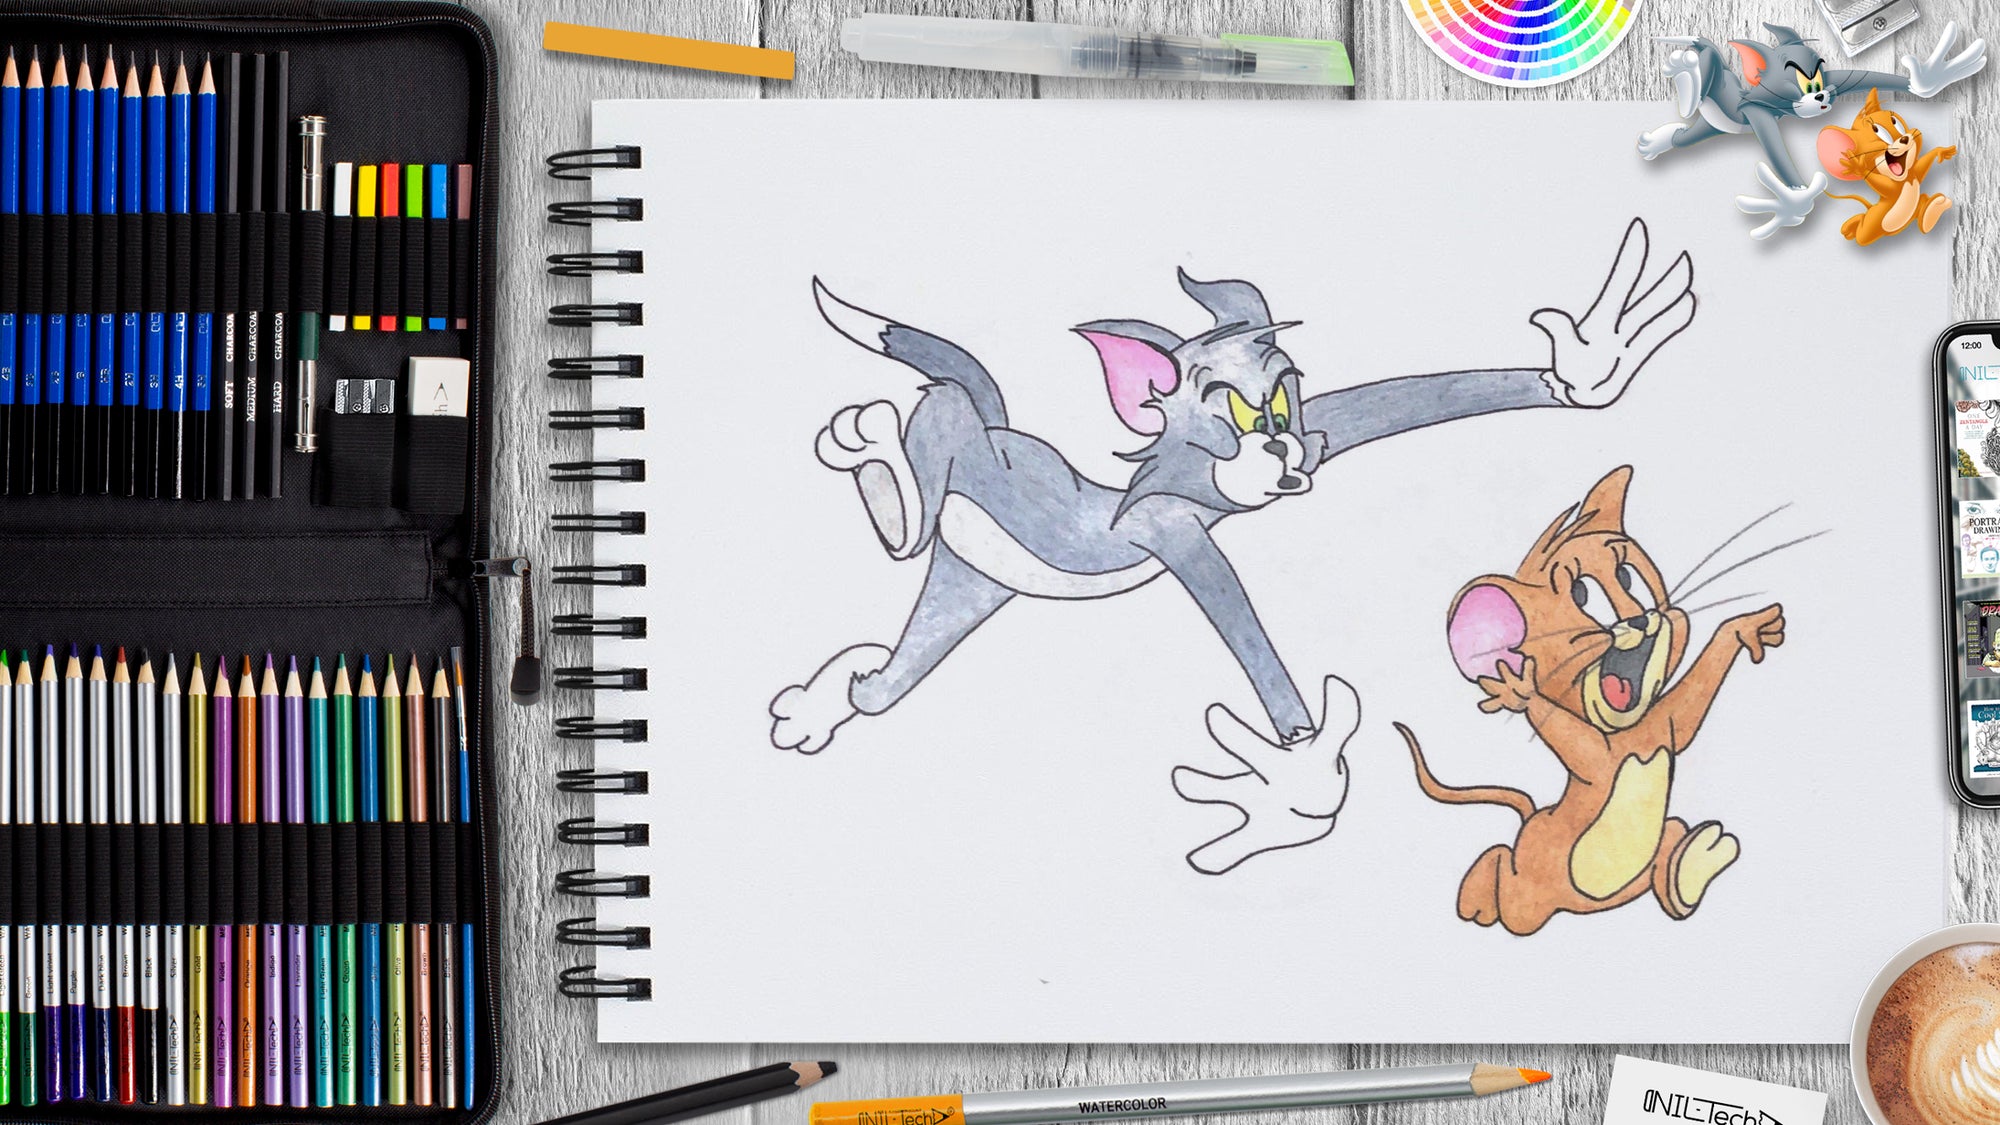 How to Draw Tom and Jerry